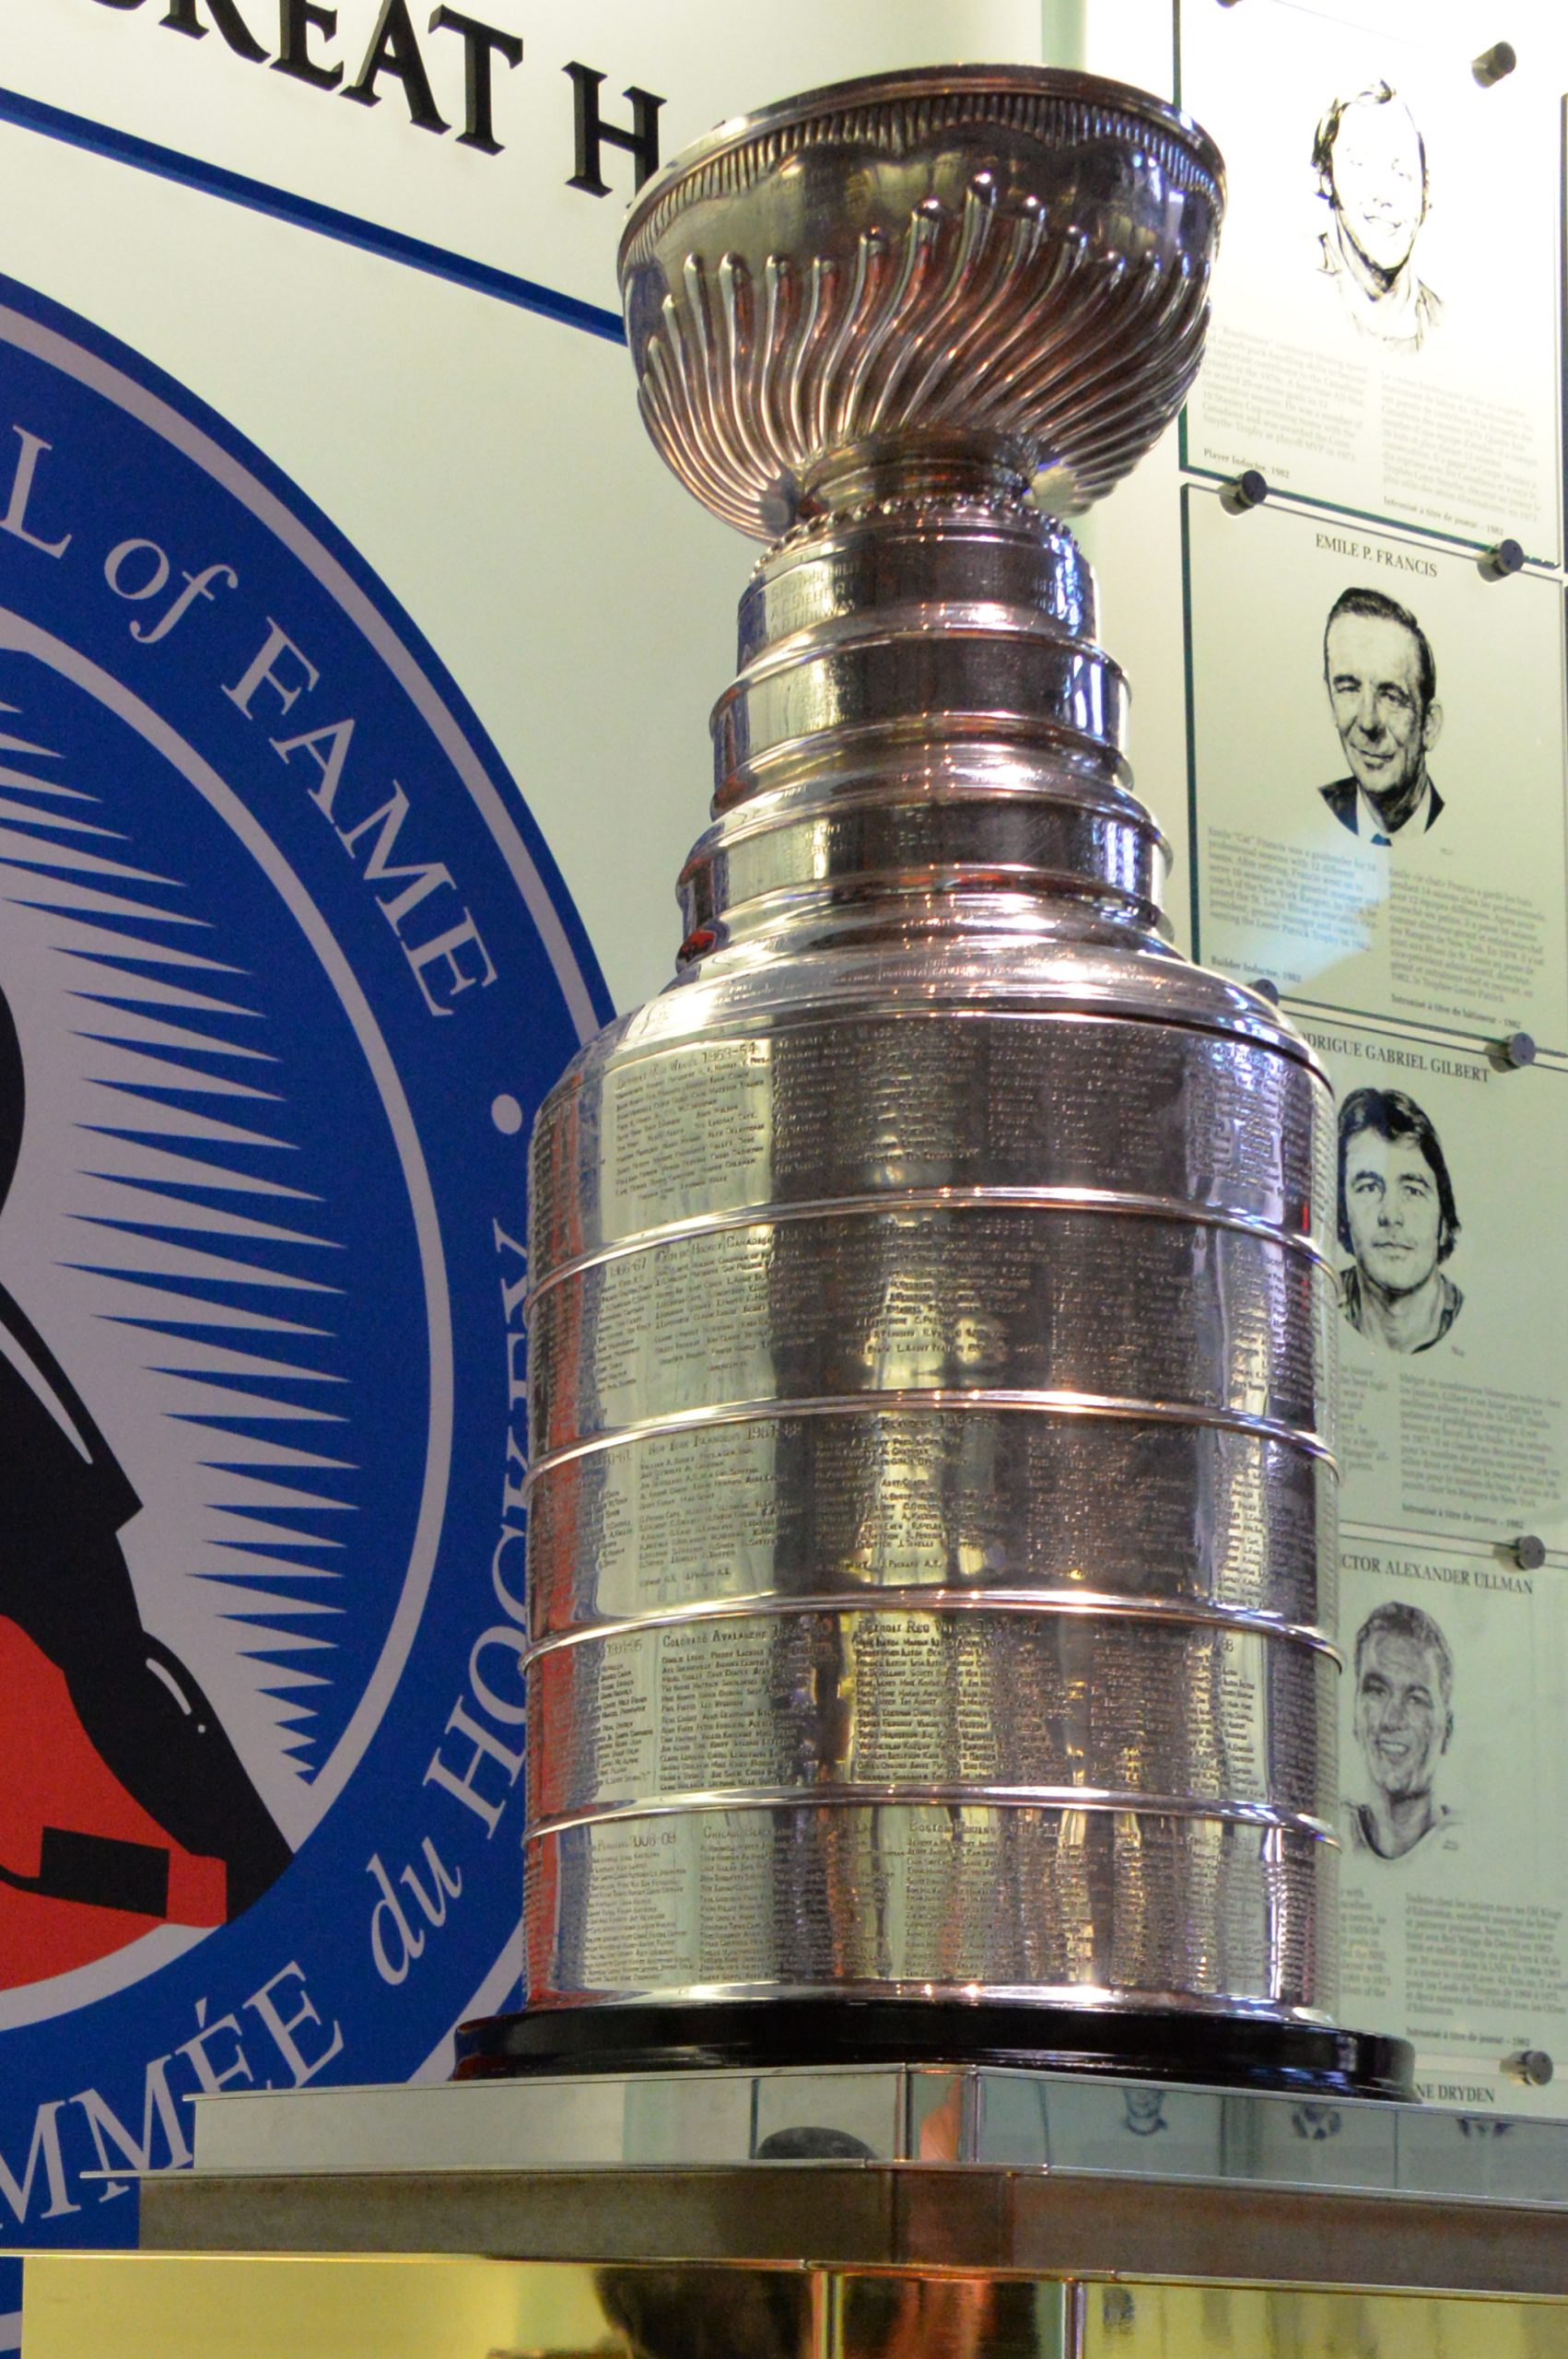 https://thehillnews.org/wp-content/uploads/2023/03/Stanley_Cup_Hockey_Hall_of_Fame_Toronto-1-scaled.jpeg